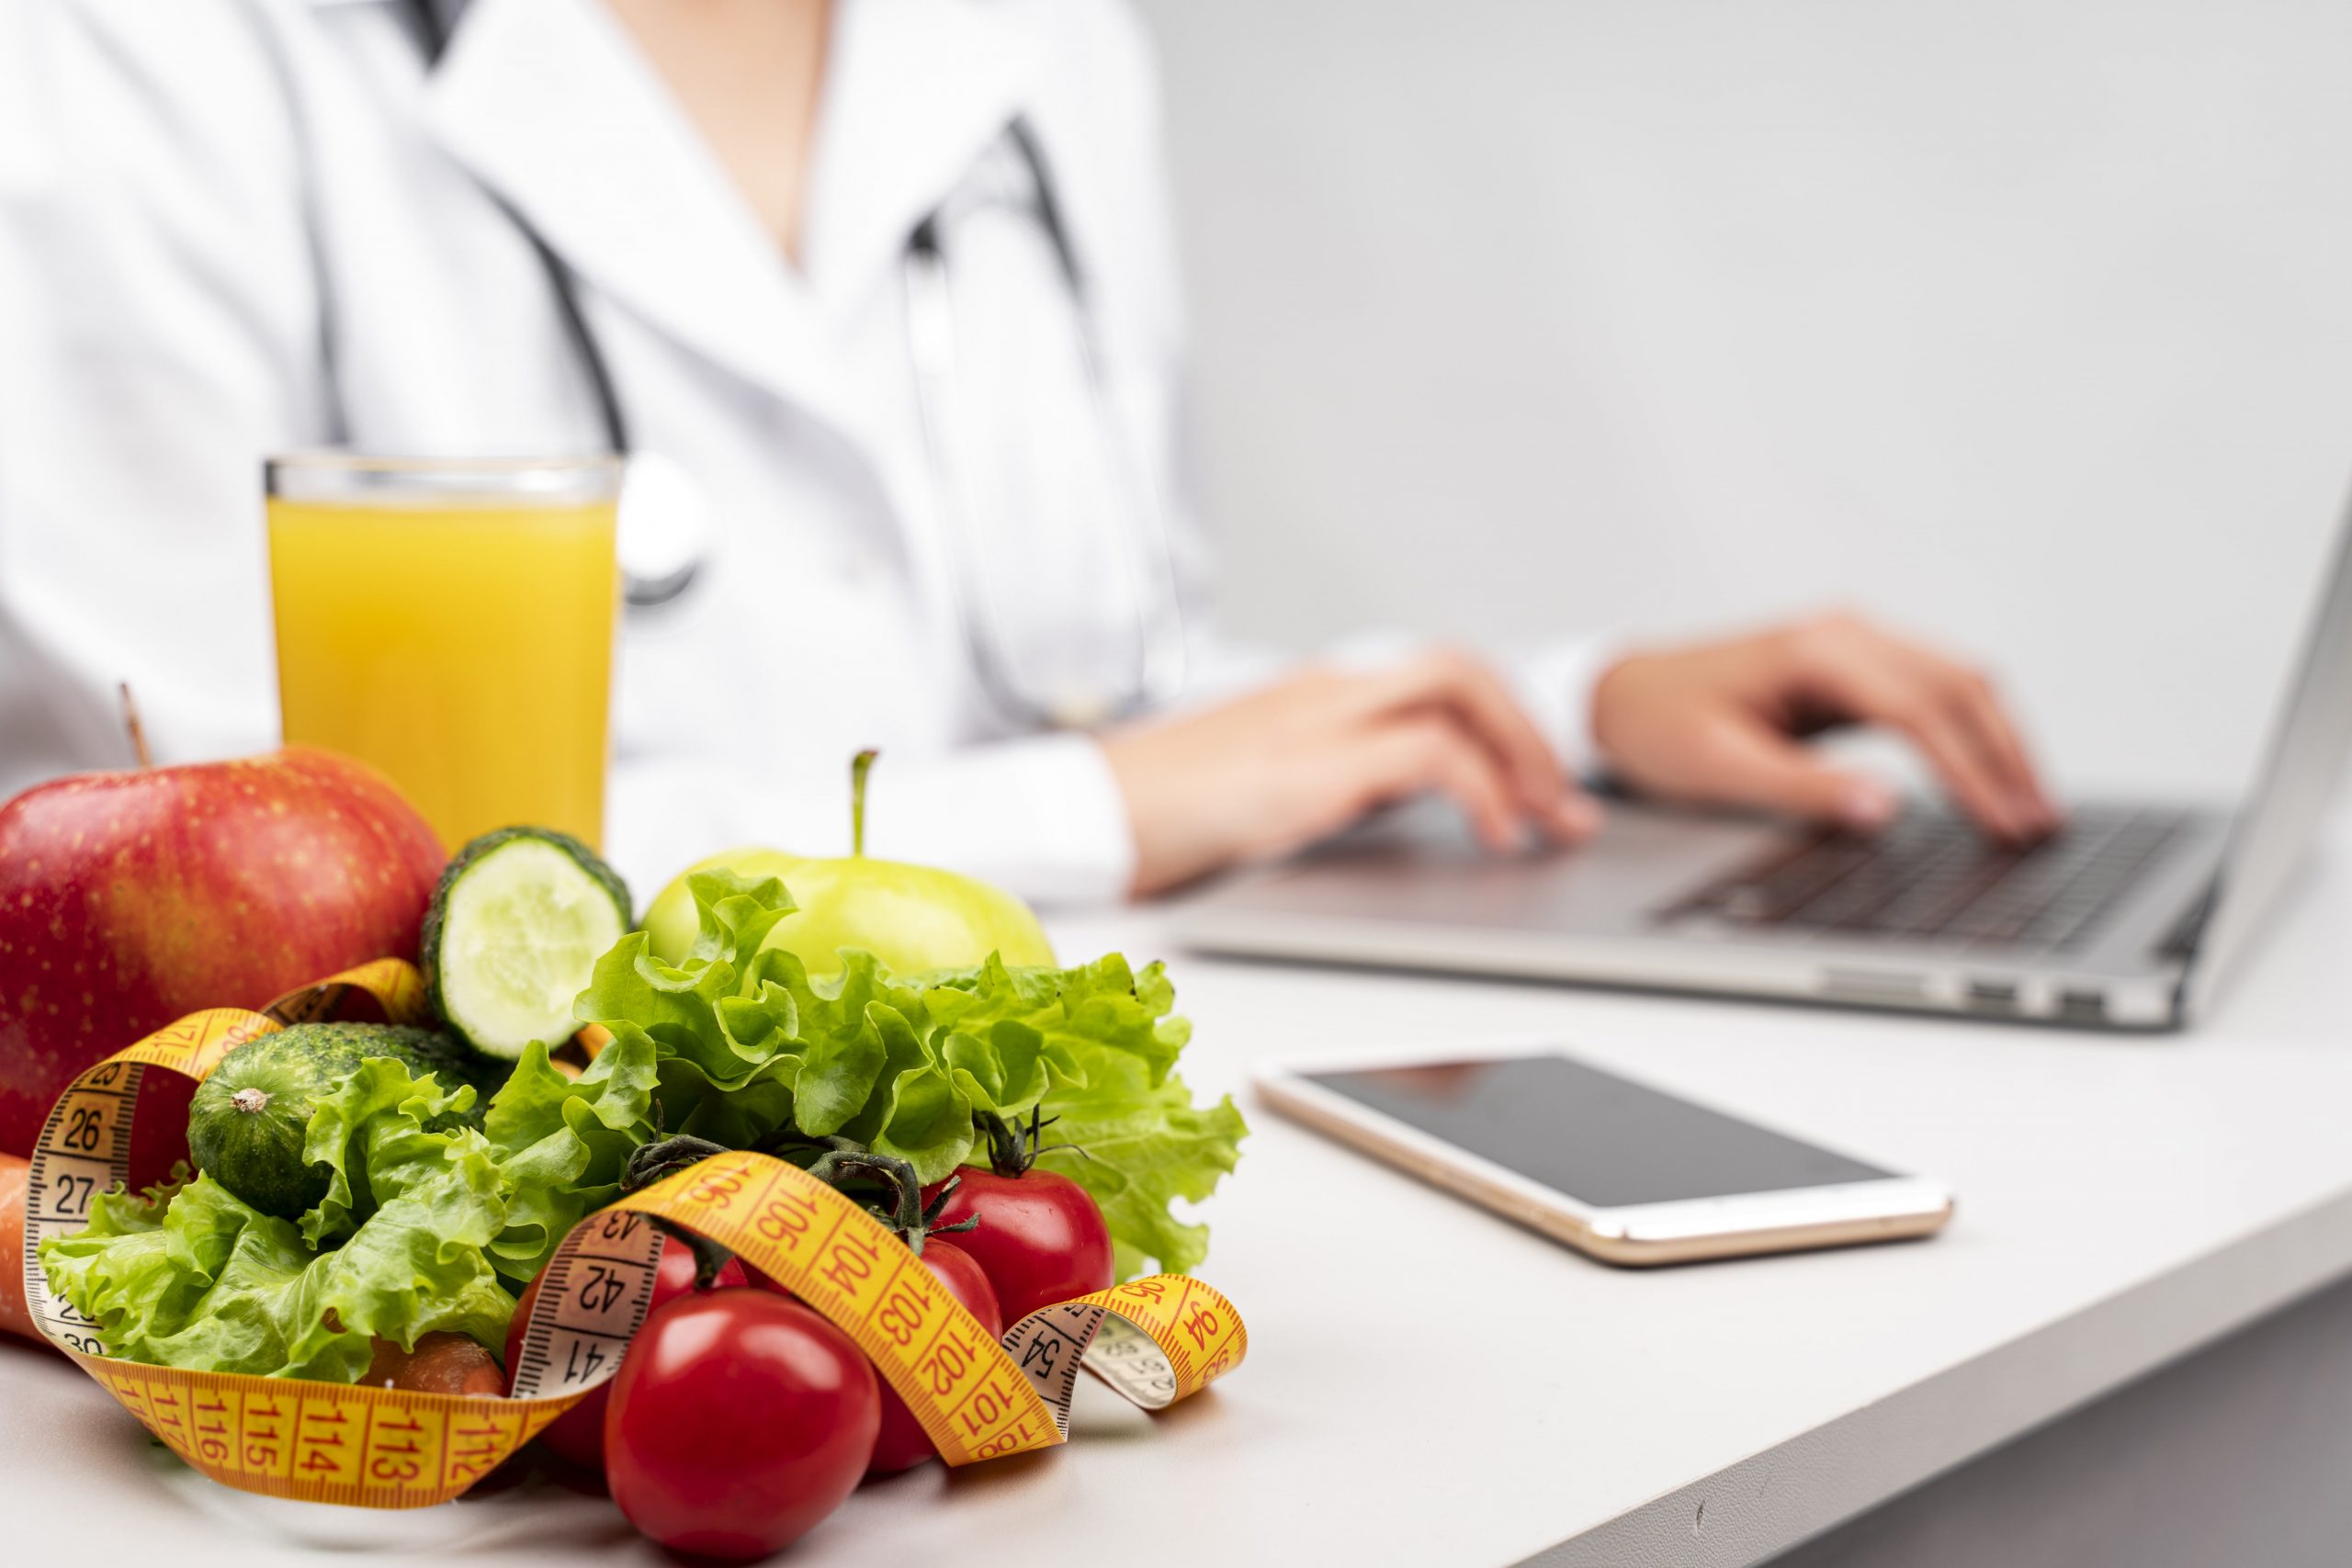 When to use the help of a nutritionist?